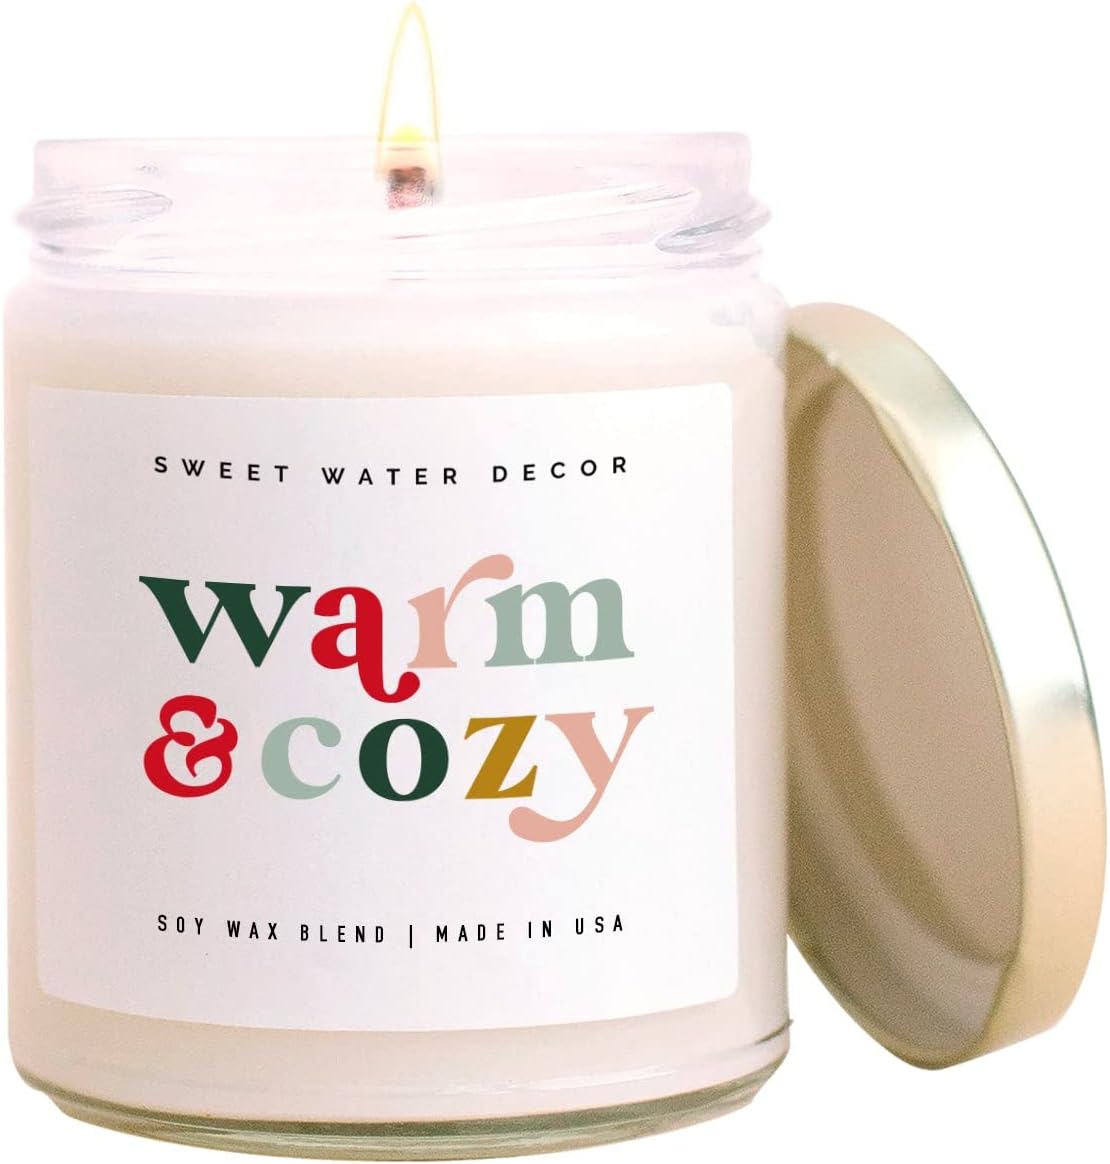 scented candles develop a cozy environment top 10 christmas gift ideas for 21-year-old female